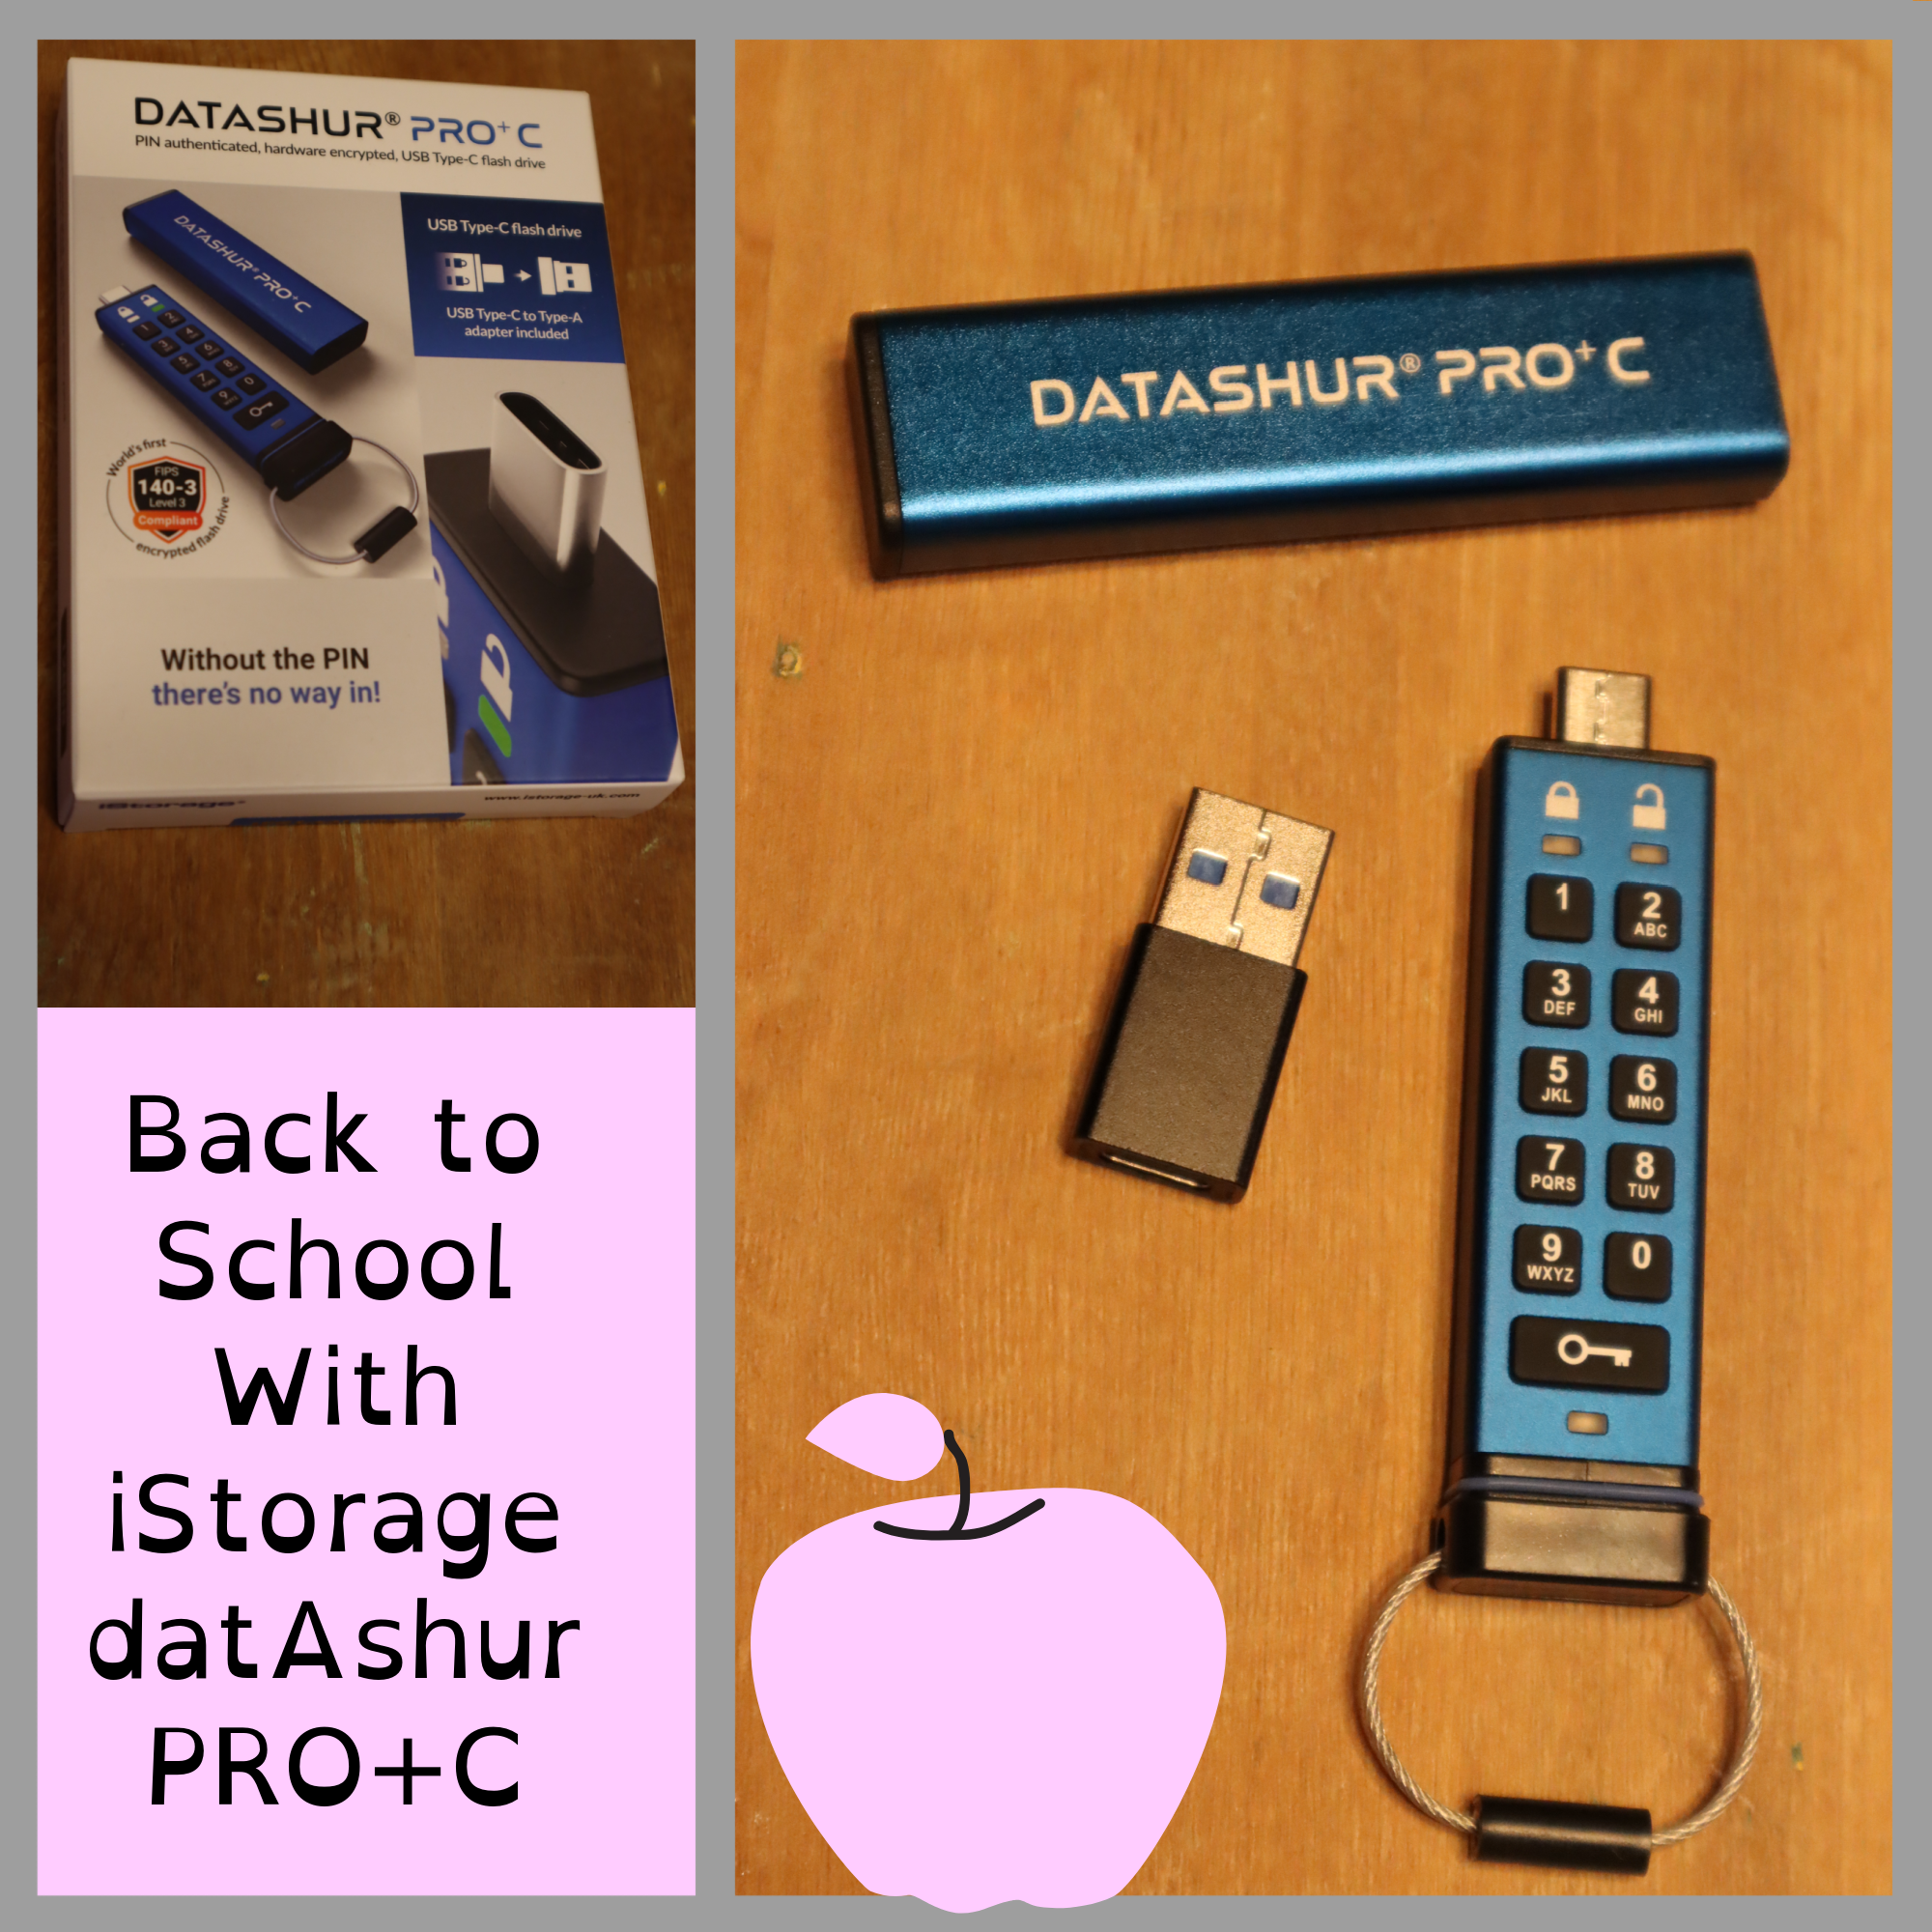 Back-to-School With iStorage datAshur PRO+C: Review